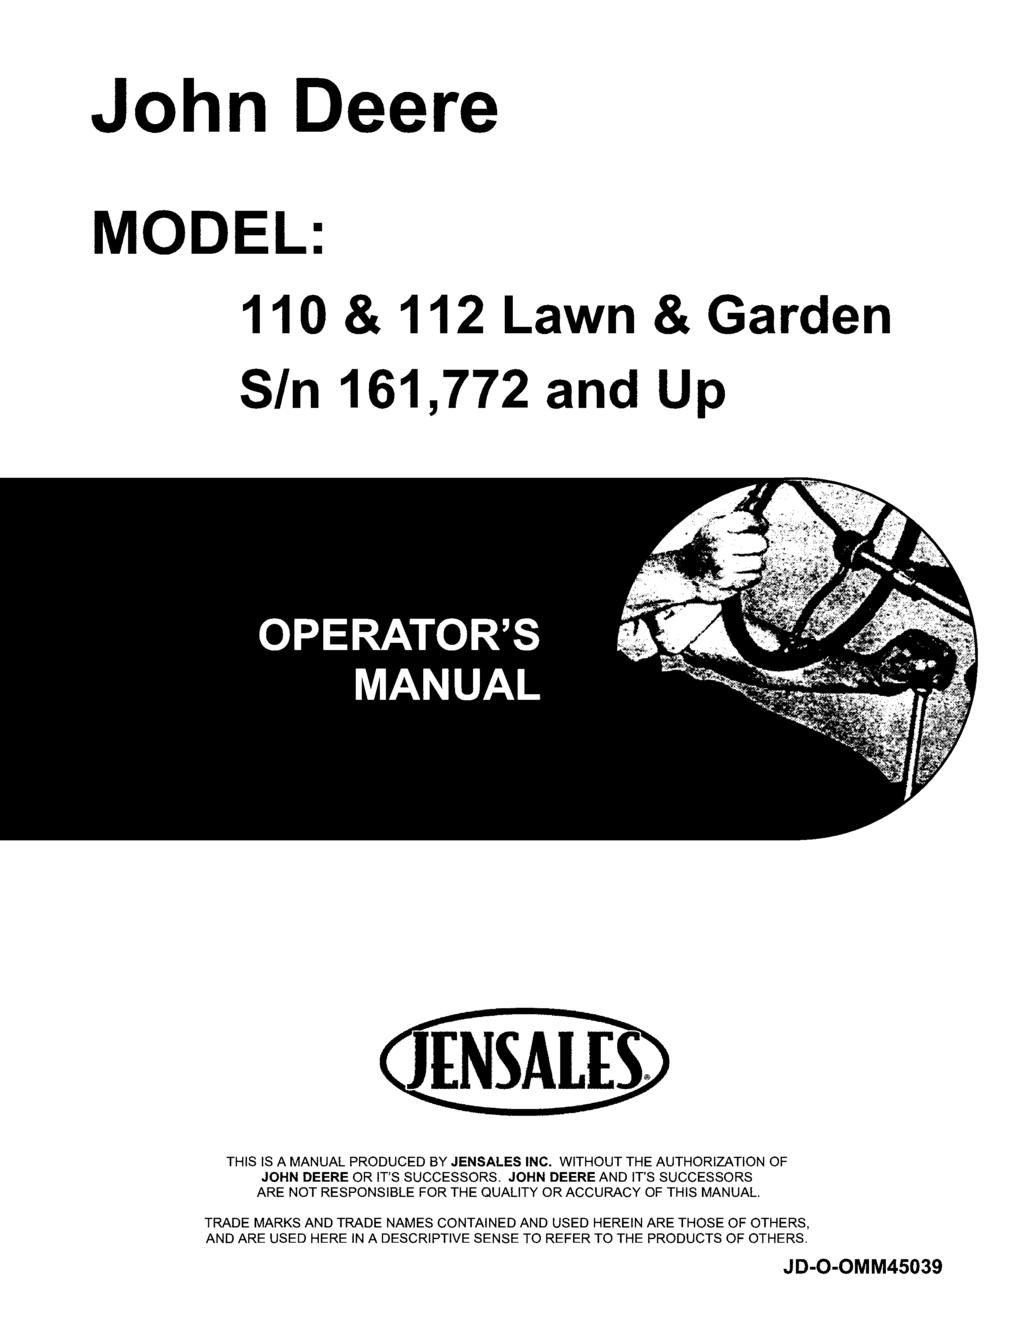 John Deere MODEL: 110 & 112 Lawn & Garden SIn 161,772 and Up THIS IS A MANUAL PRODUCED BY JENSALES INC. WITHOUT THE AUTHORIZATION OF JOHN DEERE OR IT'S SUCCESSORS.